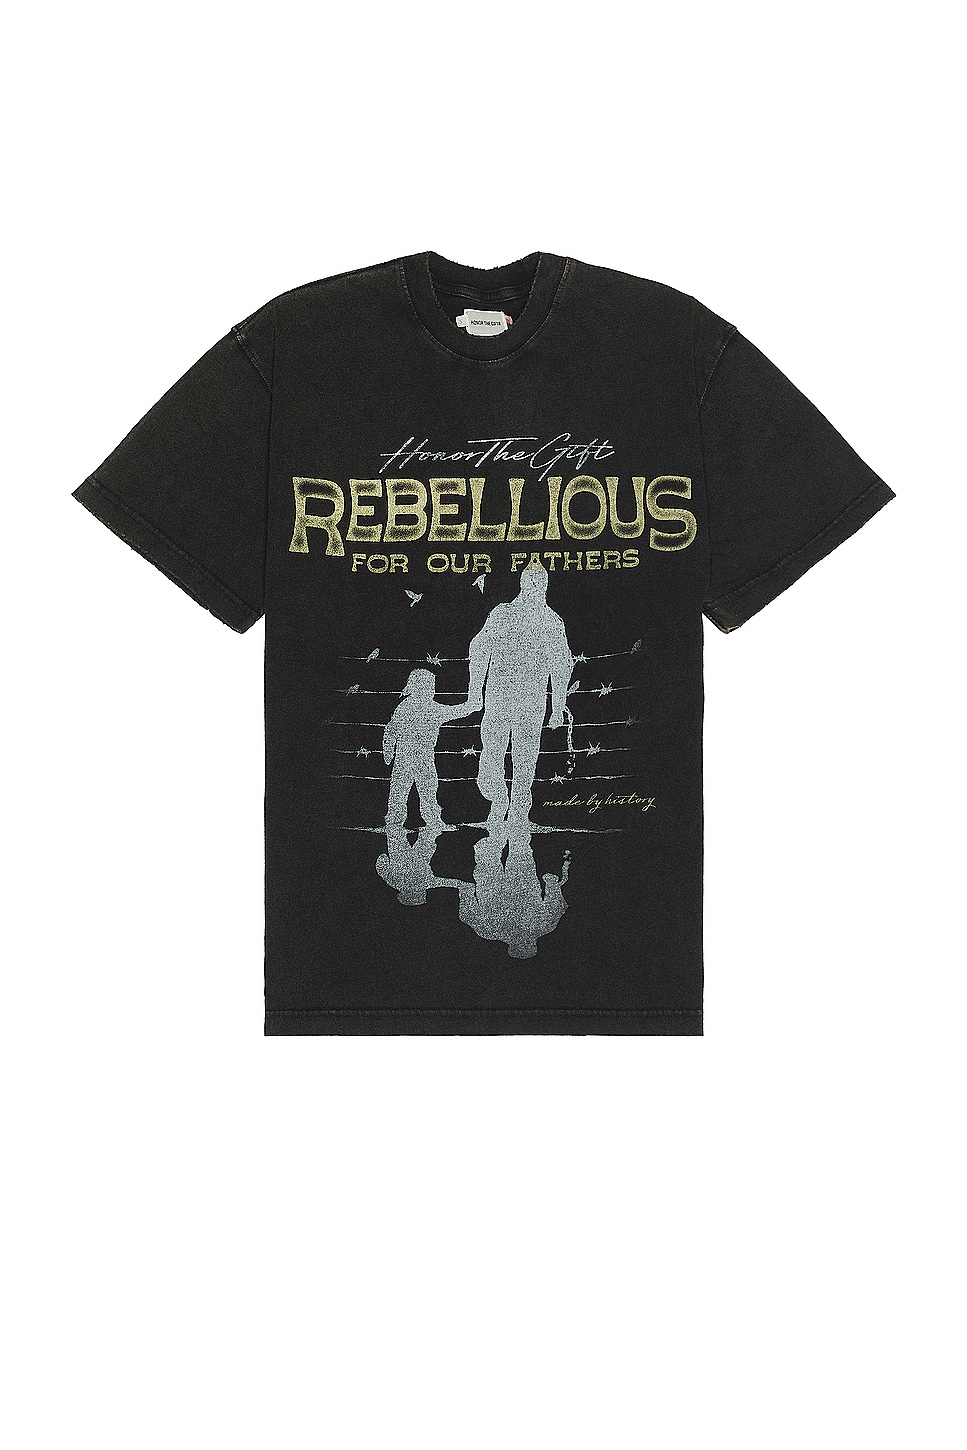 A-spring Rebellious For Our Fathers Tee in Black